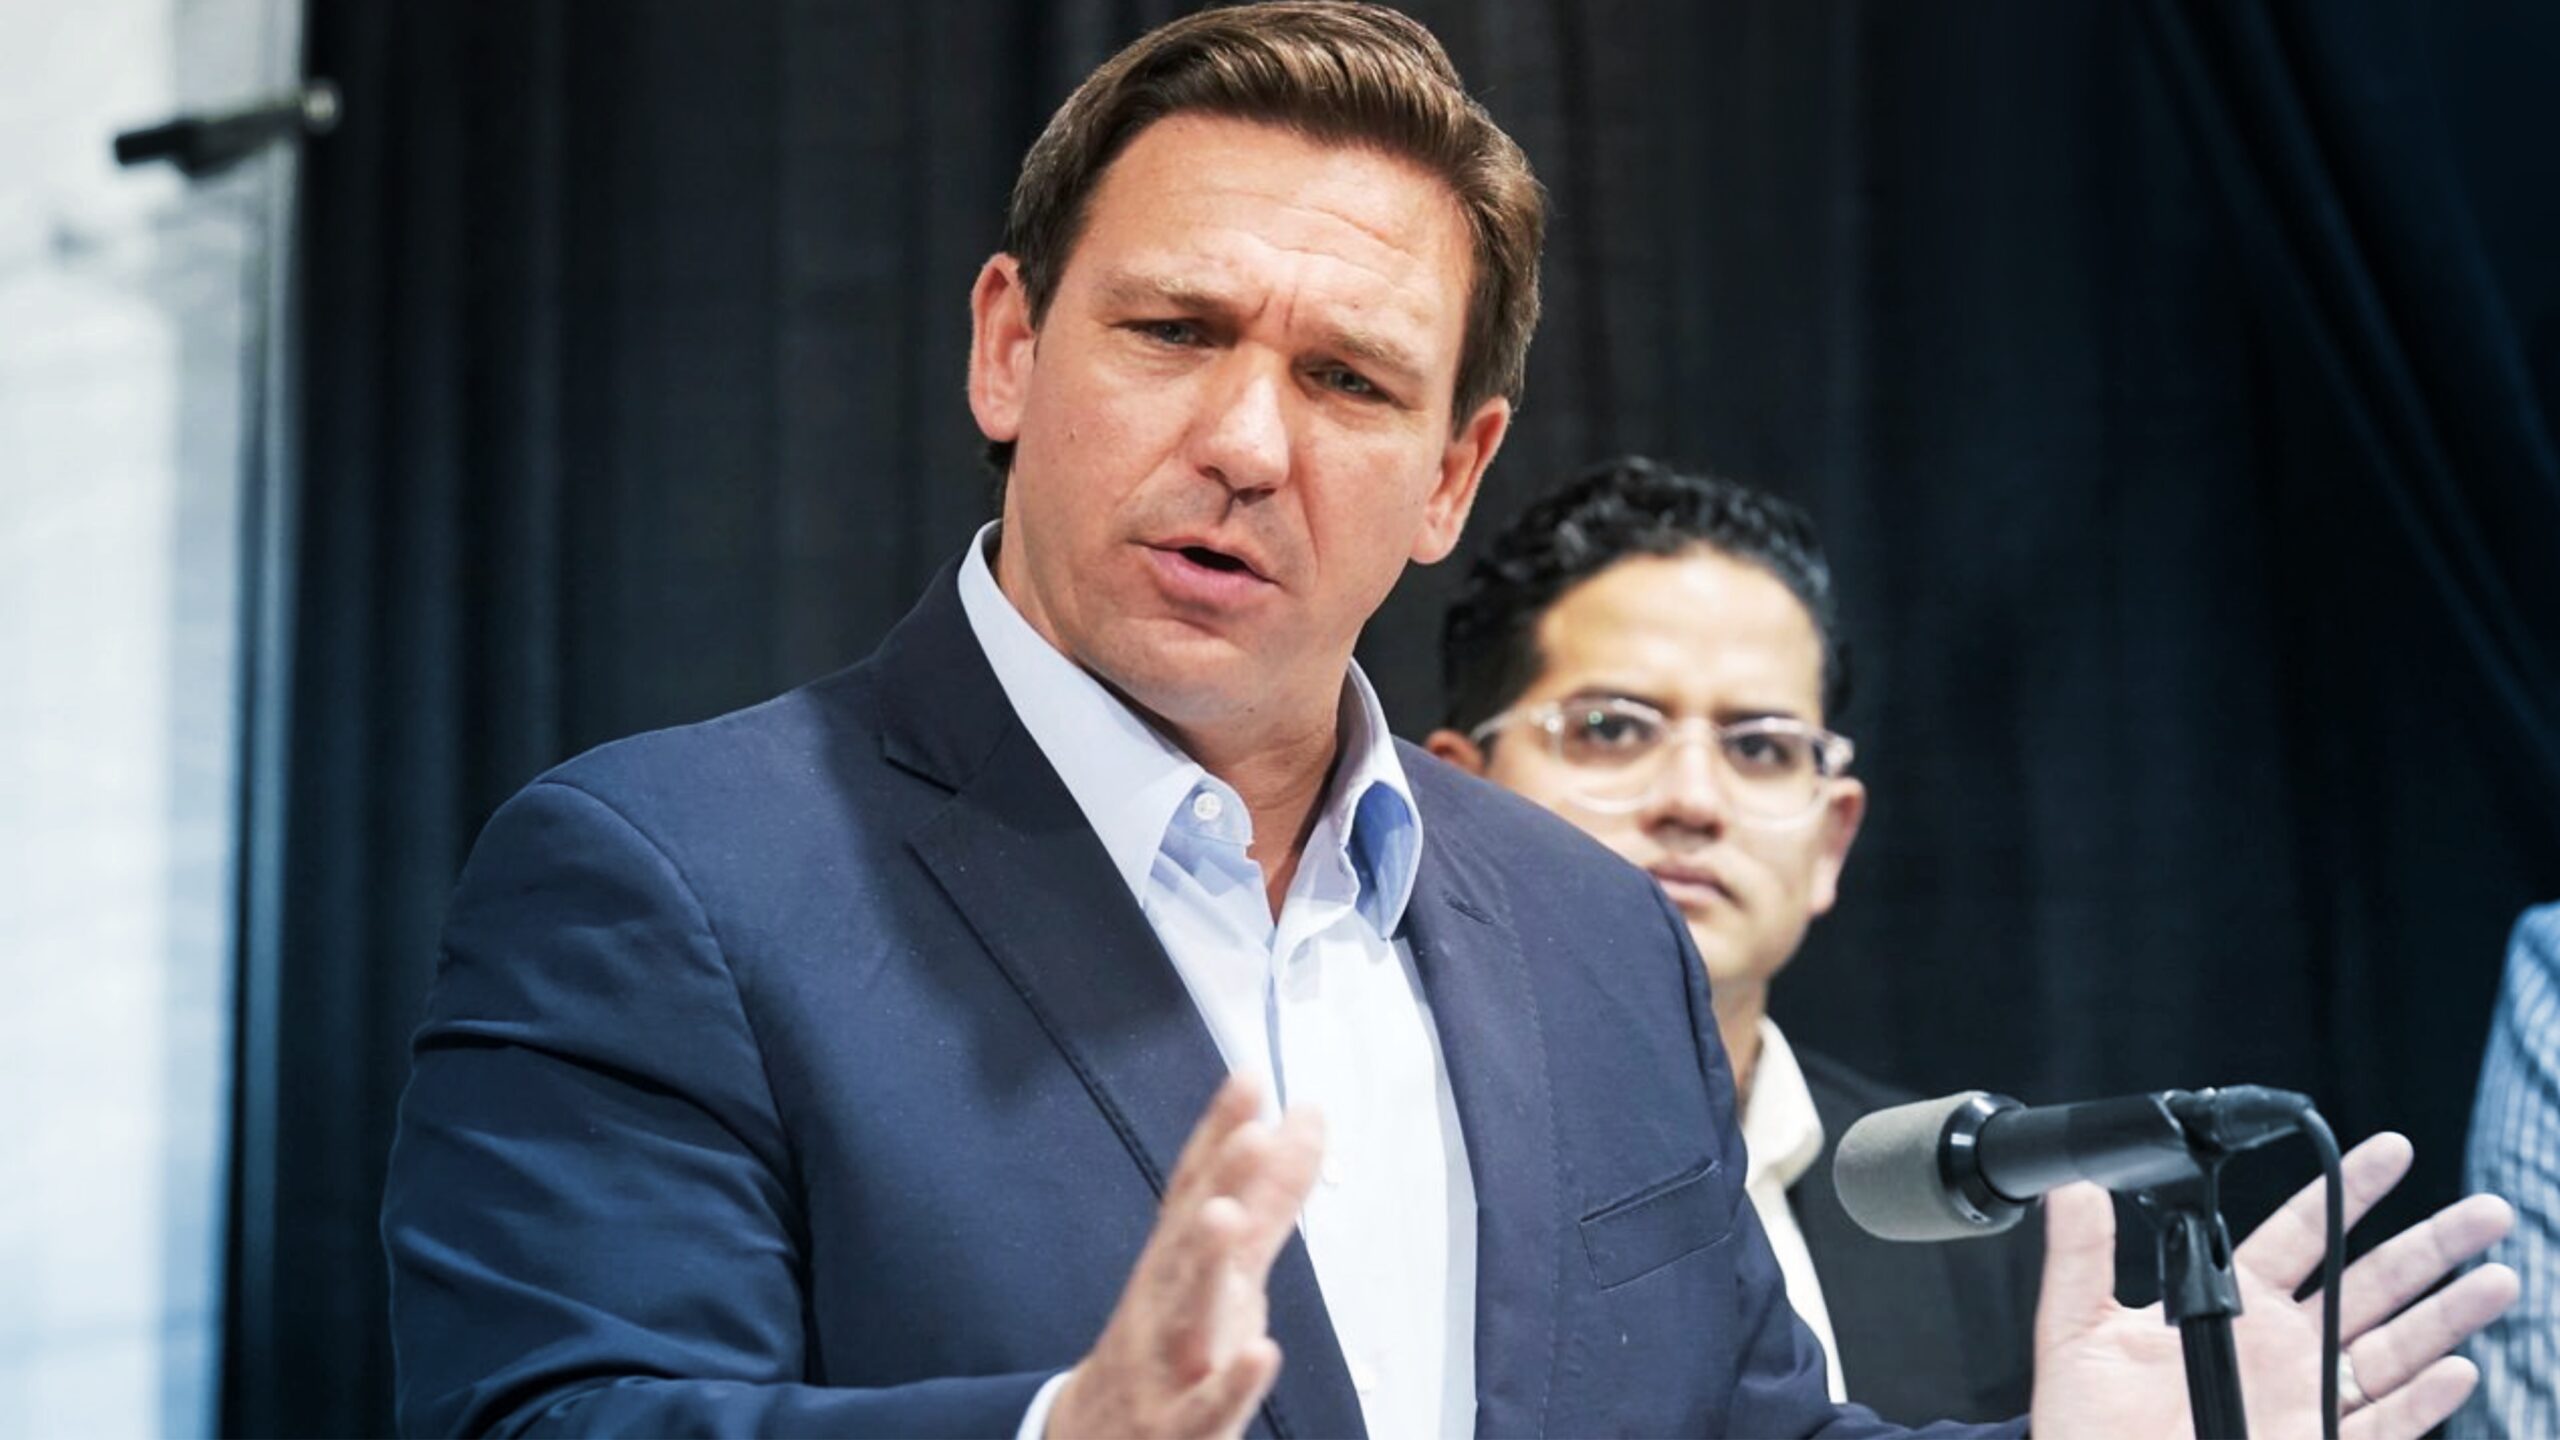 DeSantis: ‘Big Tech Has Become The Censorship Arm Of The
Democratic Party’ 1